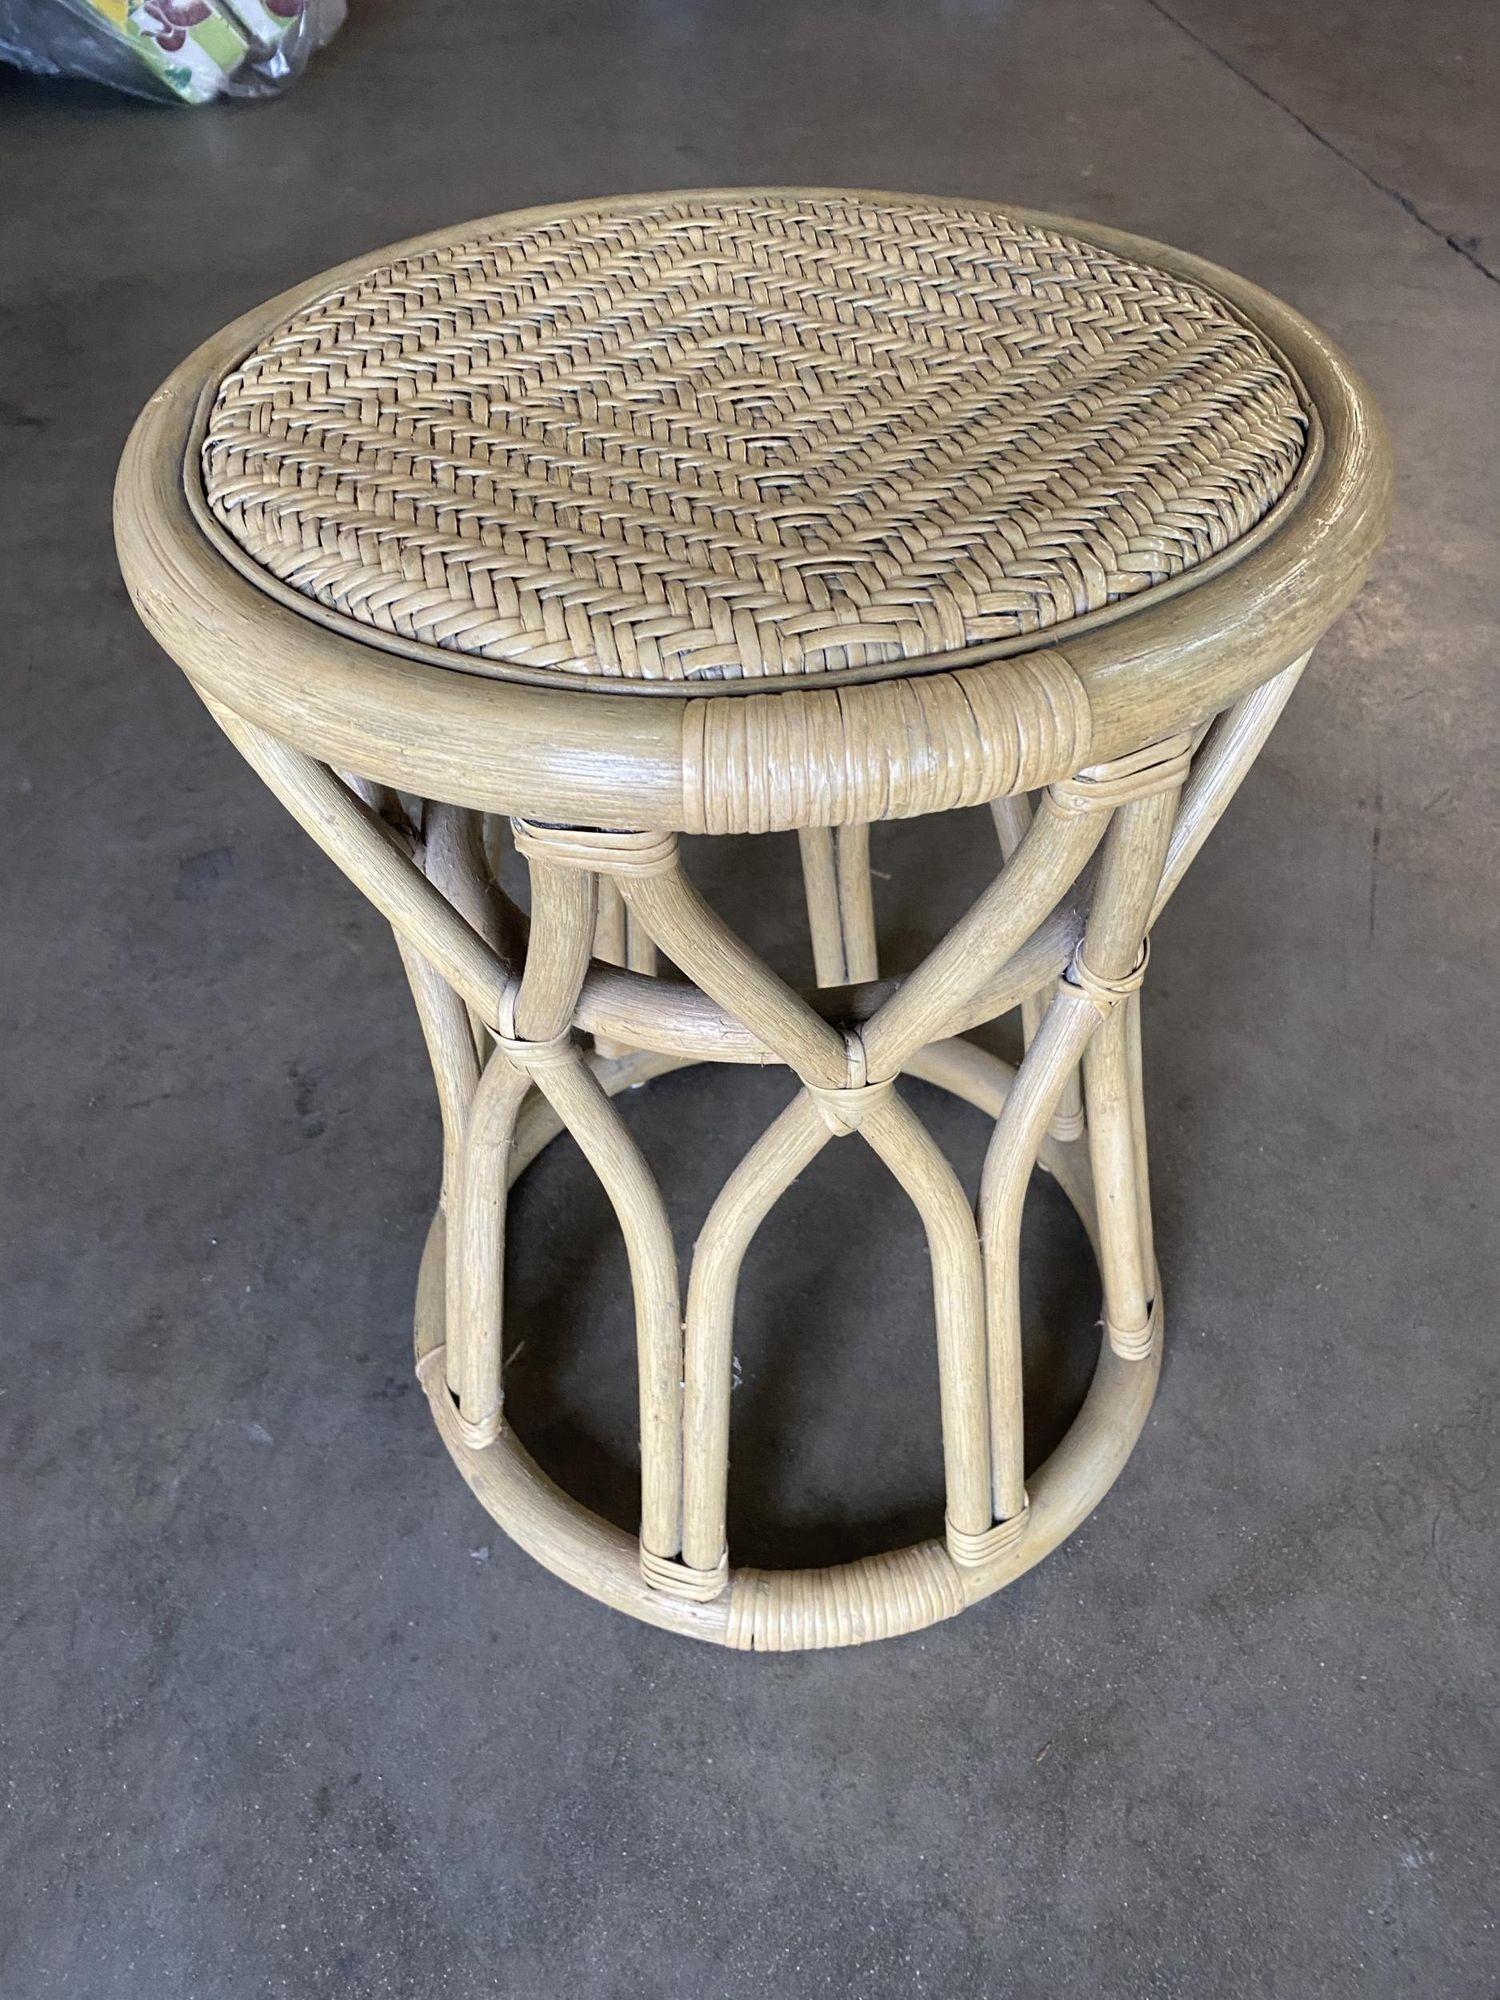 Restored 1970s three-stand rattan vanity stool with wicker seat featuring an 